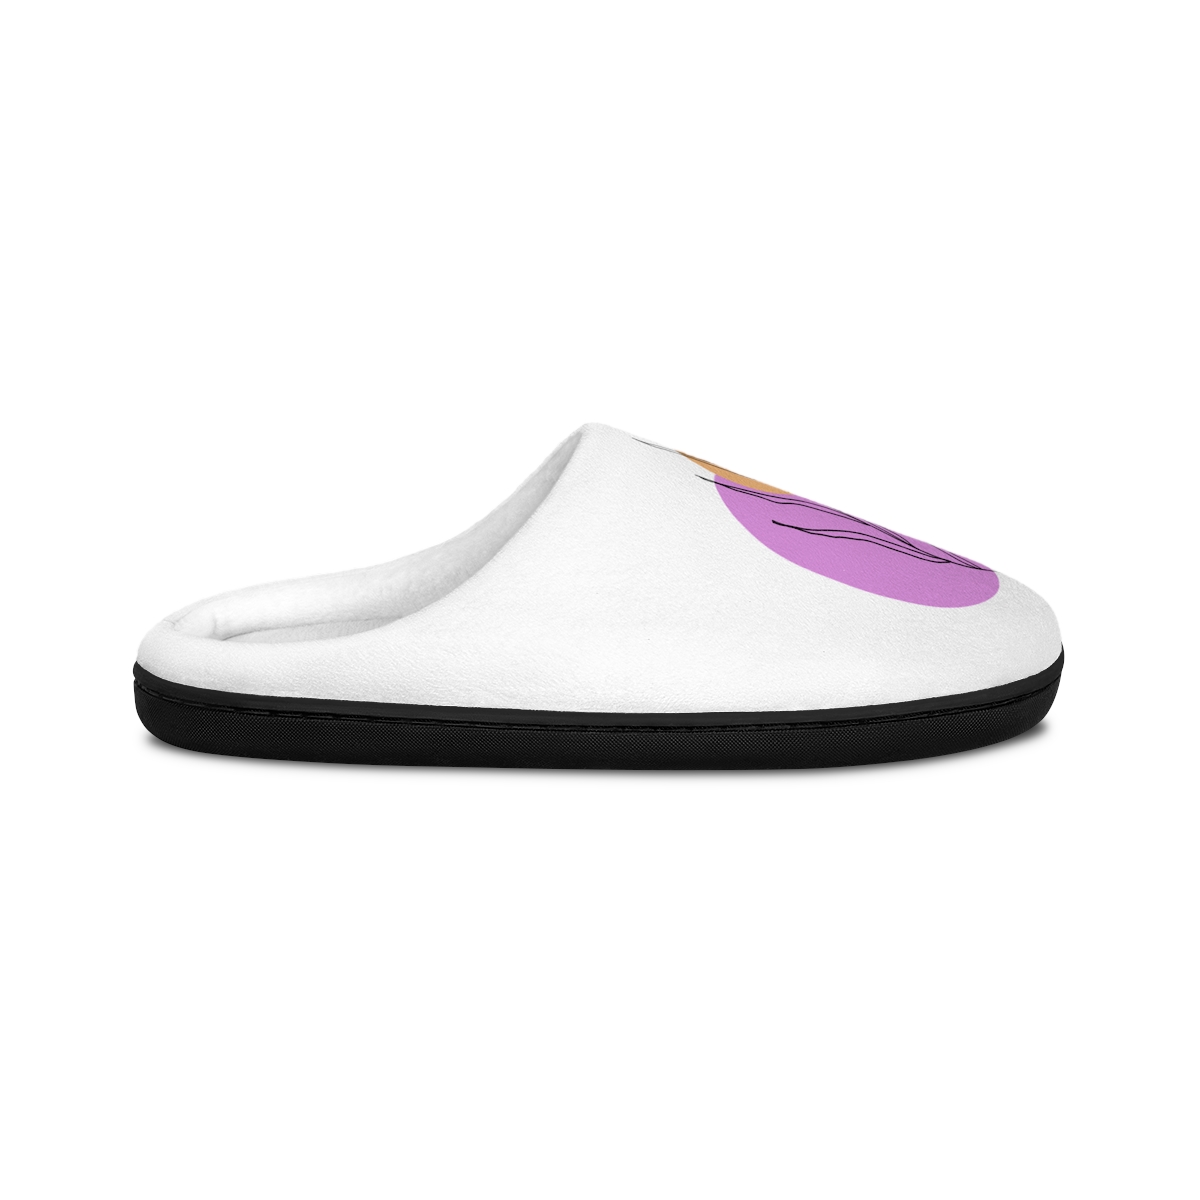 Men's Indoor Slippers product thumbnail image